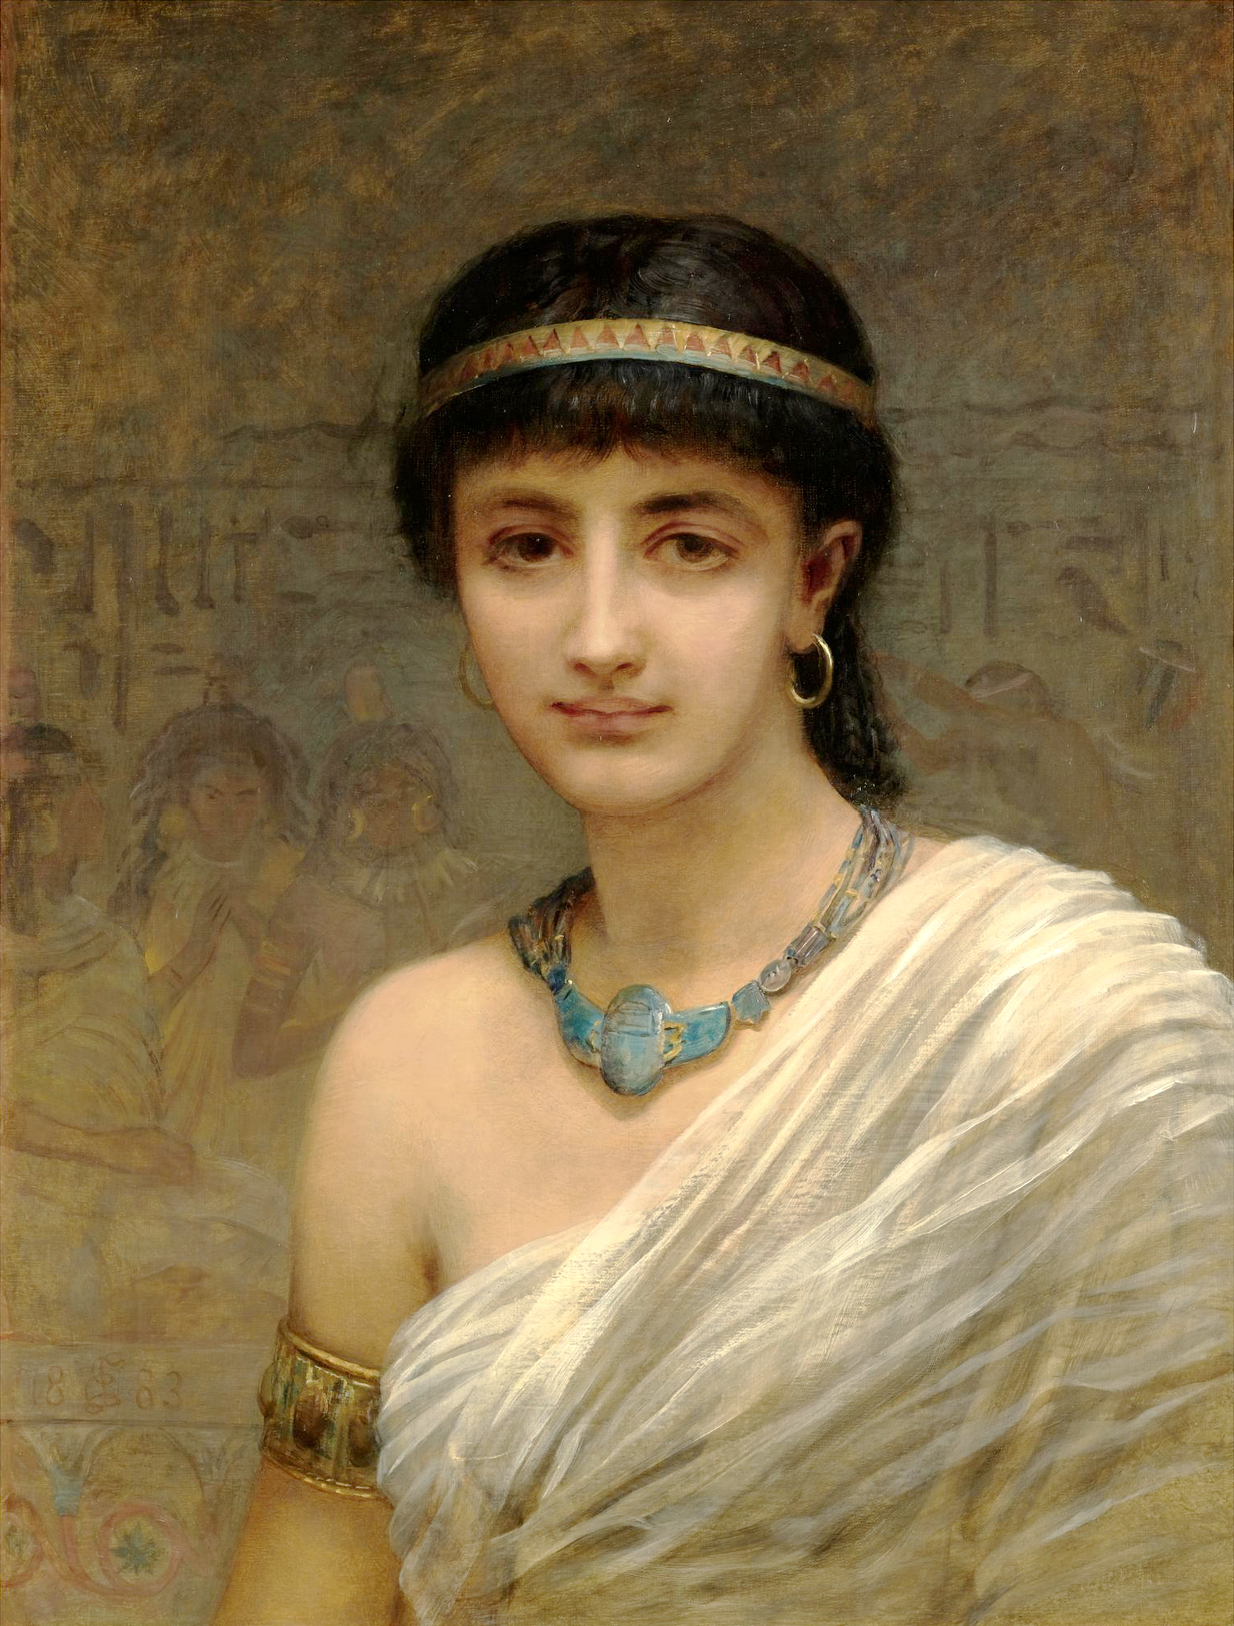 A portrait image of goddess Isis. The image portrays a half silhouette (head and upper torso). Isis is depicted as wearing a golden band across her dark hair that is tied back into a long braid. She is also adorned with an intricate gold and turquoise necklace and gold bangle on her right arm. Her left arm and upper chest are draped with white sheer cloth.